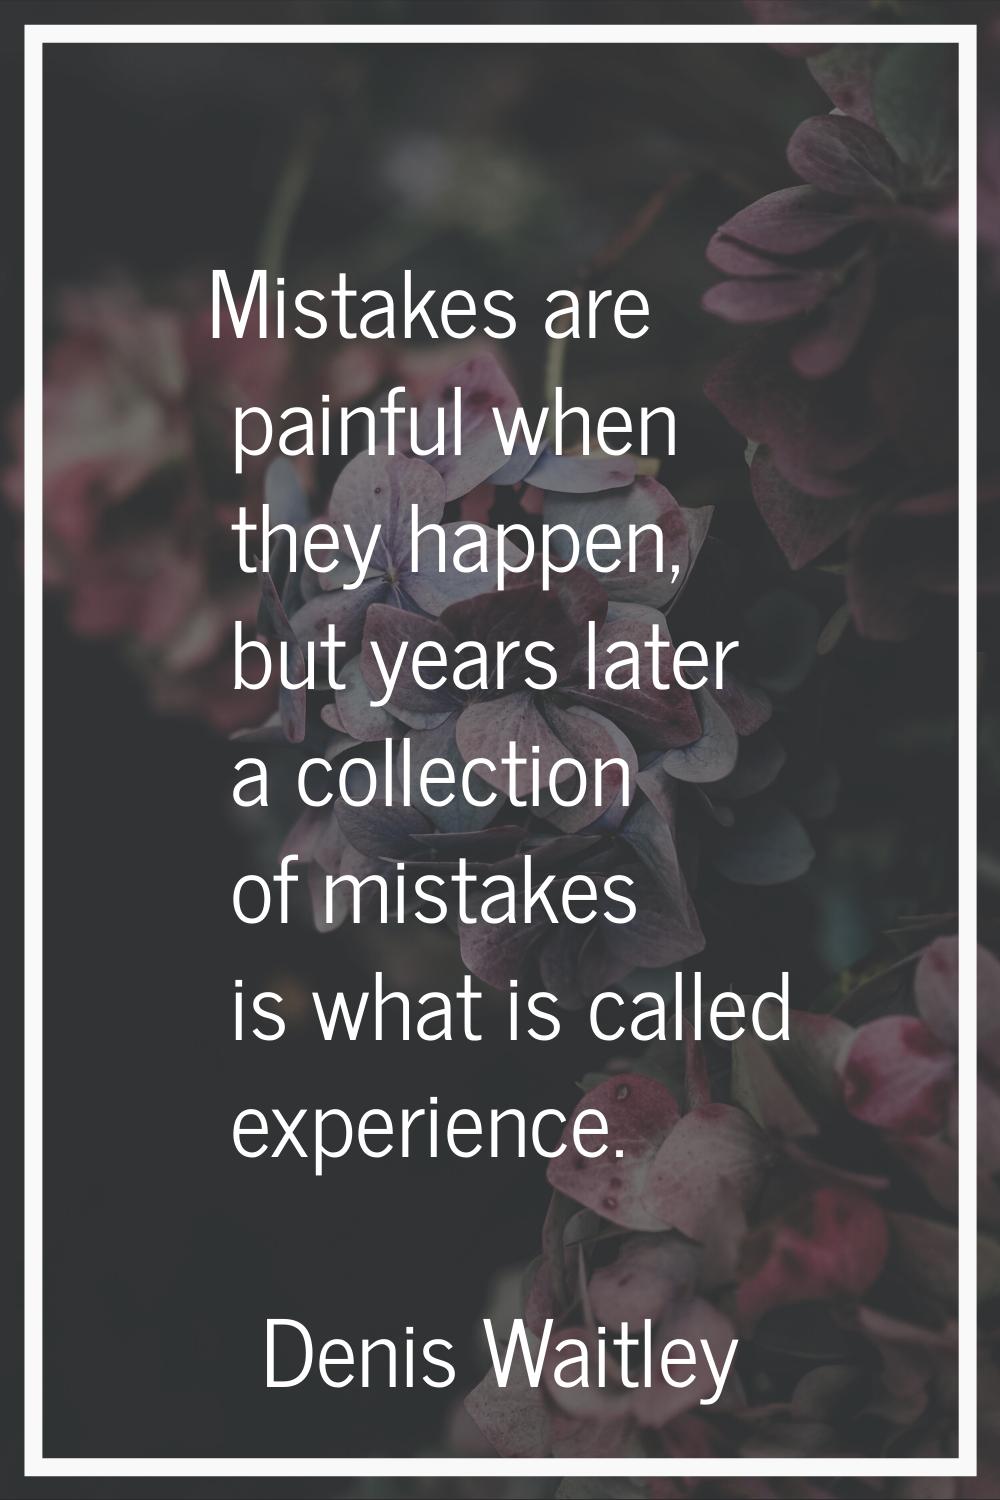 Mistakes are painful when they happen, but years later a collection of mistakes is what is called e